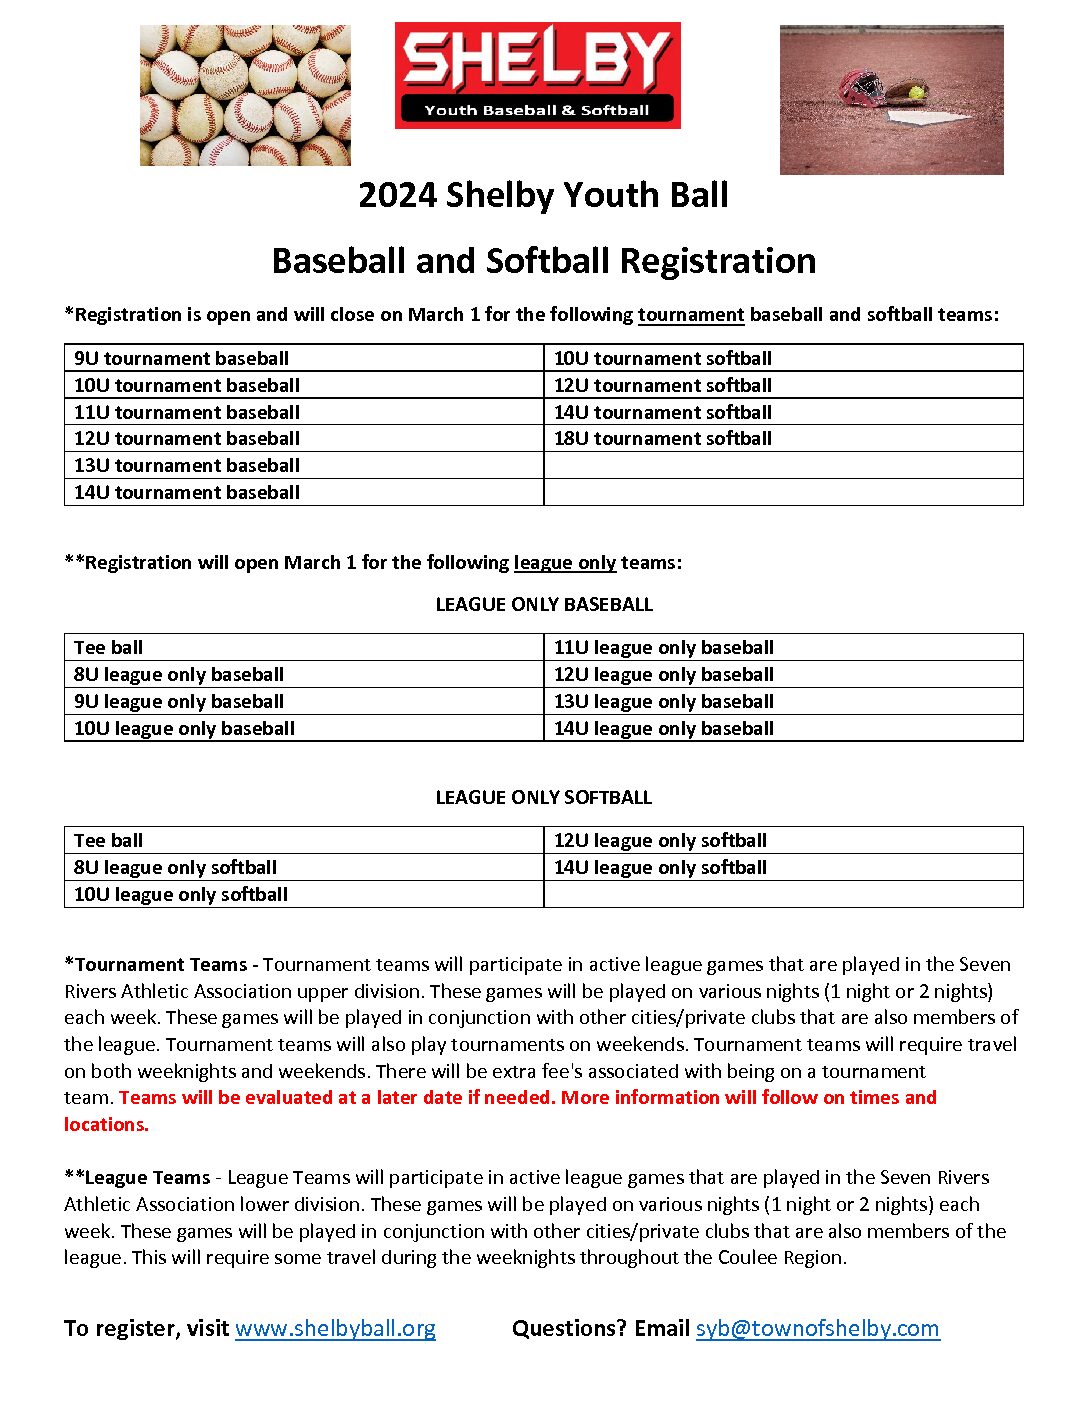 Shelby Youth Ball